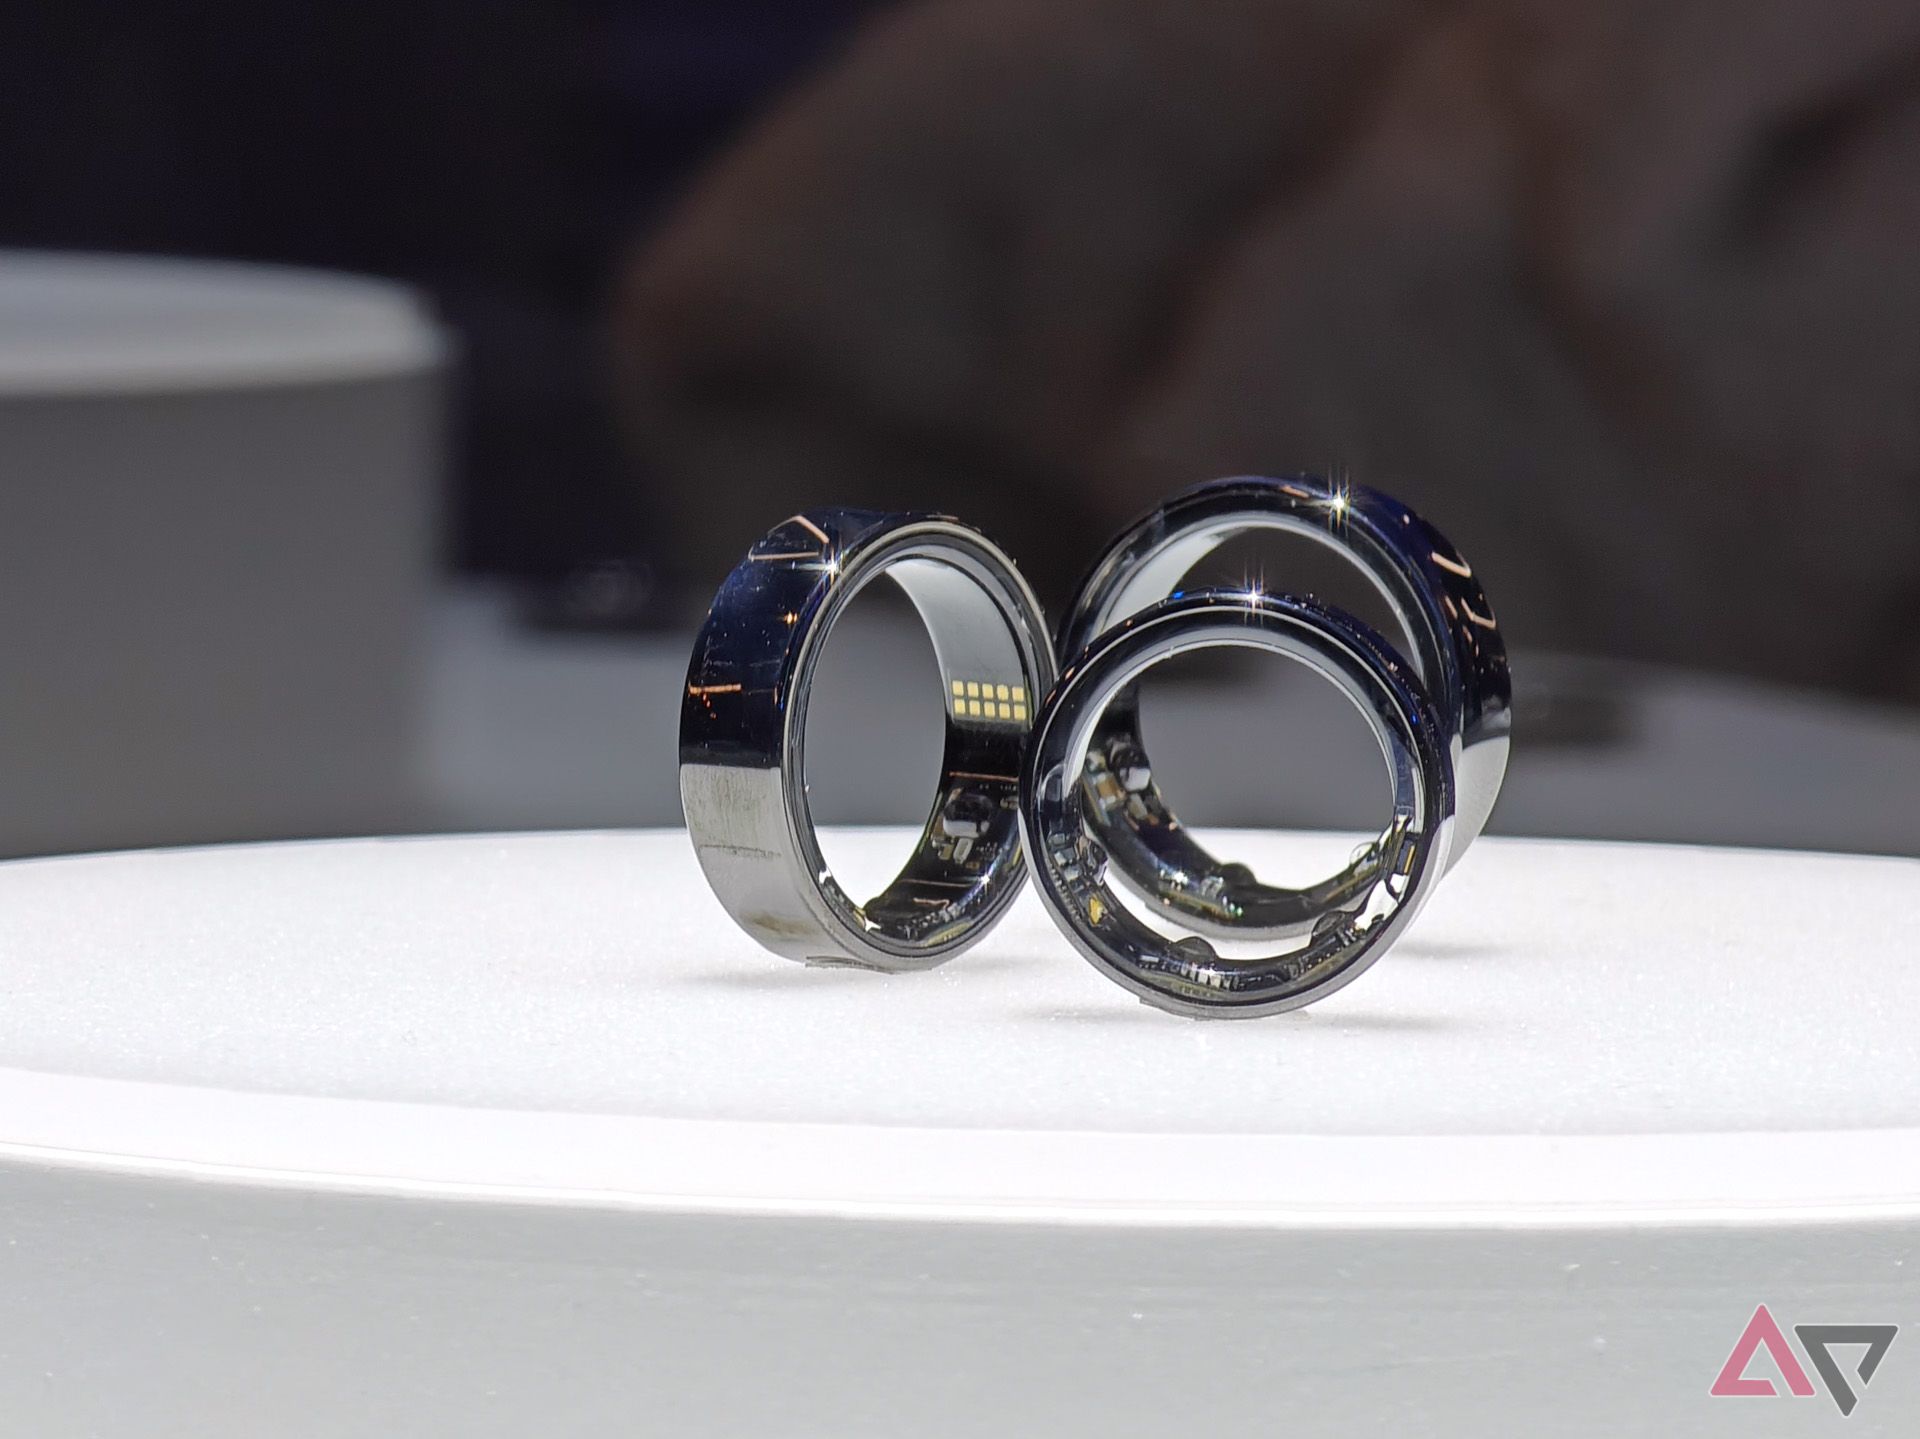 Galaxy Ring hands-on: Samsung unveils exciting new wearable technology